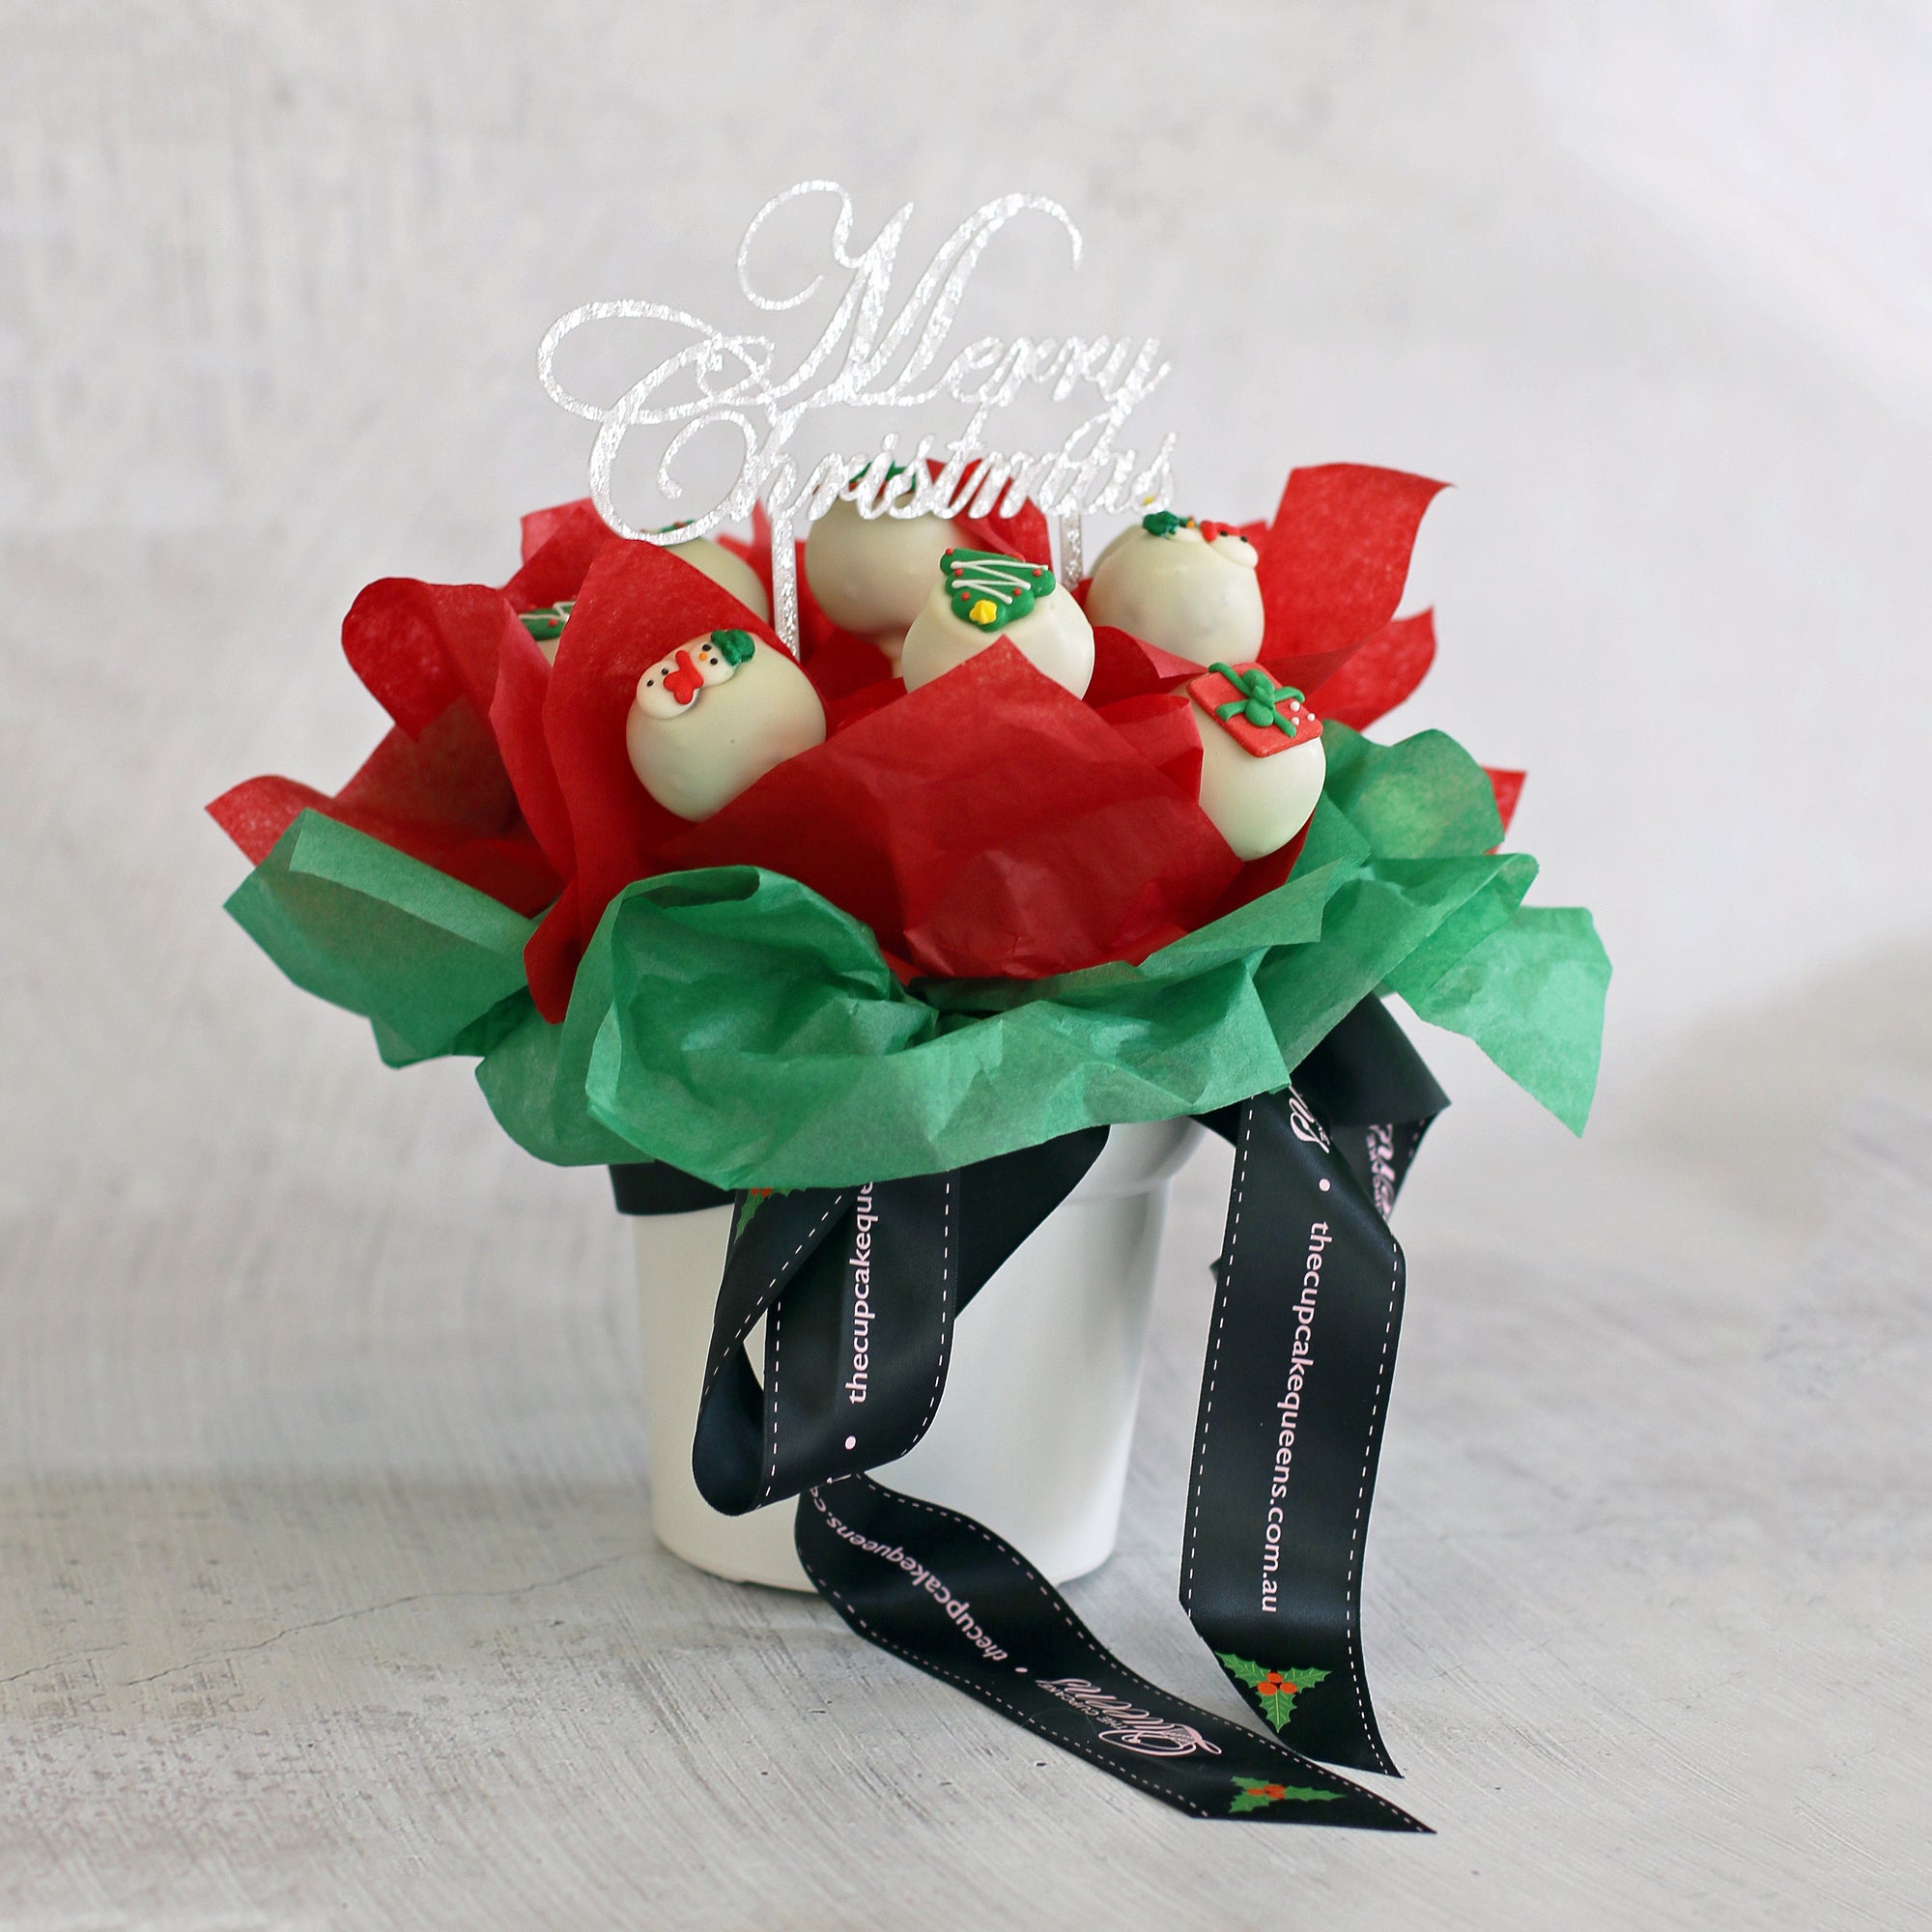 Christmas Cake Pop Bouquet with Topper Cake Pop The Cupcake Queens 